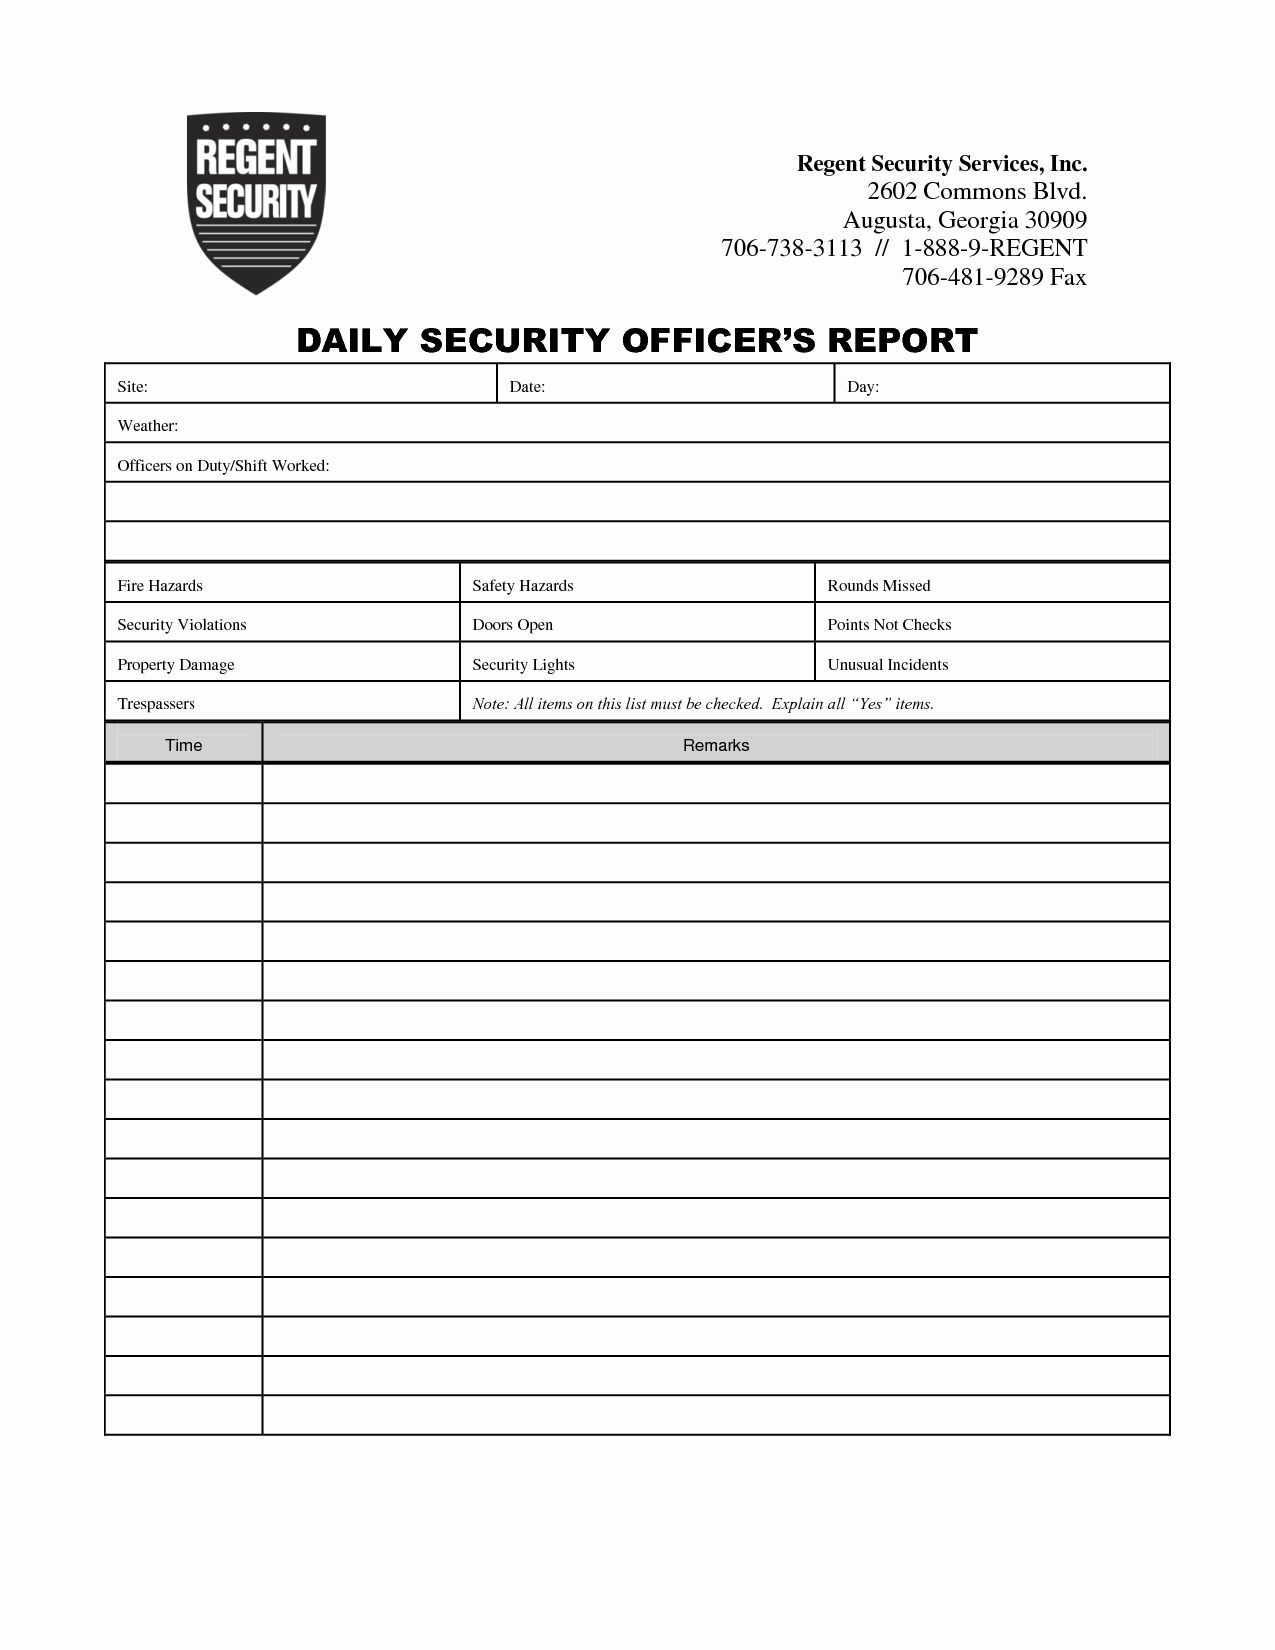 Weekly Activities Report Template Lovely Security Guard Daily Activity Report Template